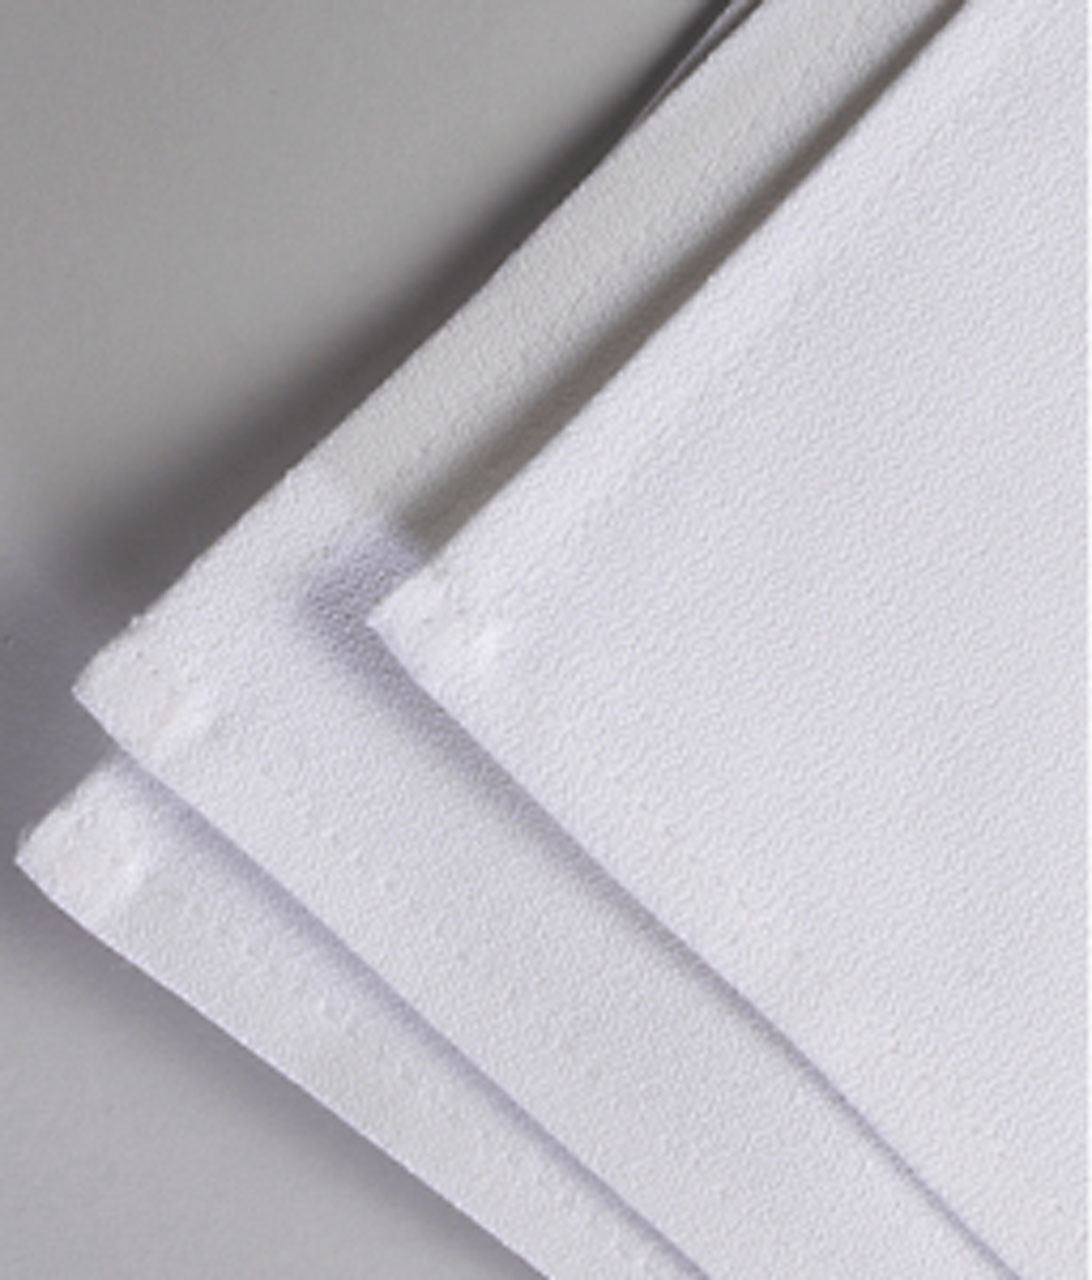 Does the momie cloth of the Cotton Momie Napkins have a smooth texture?